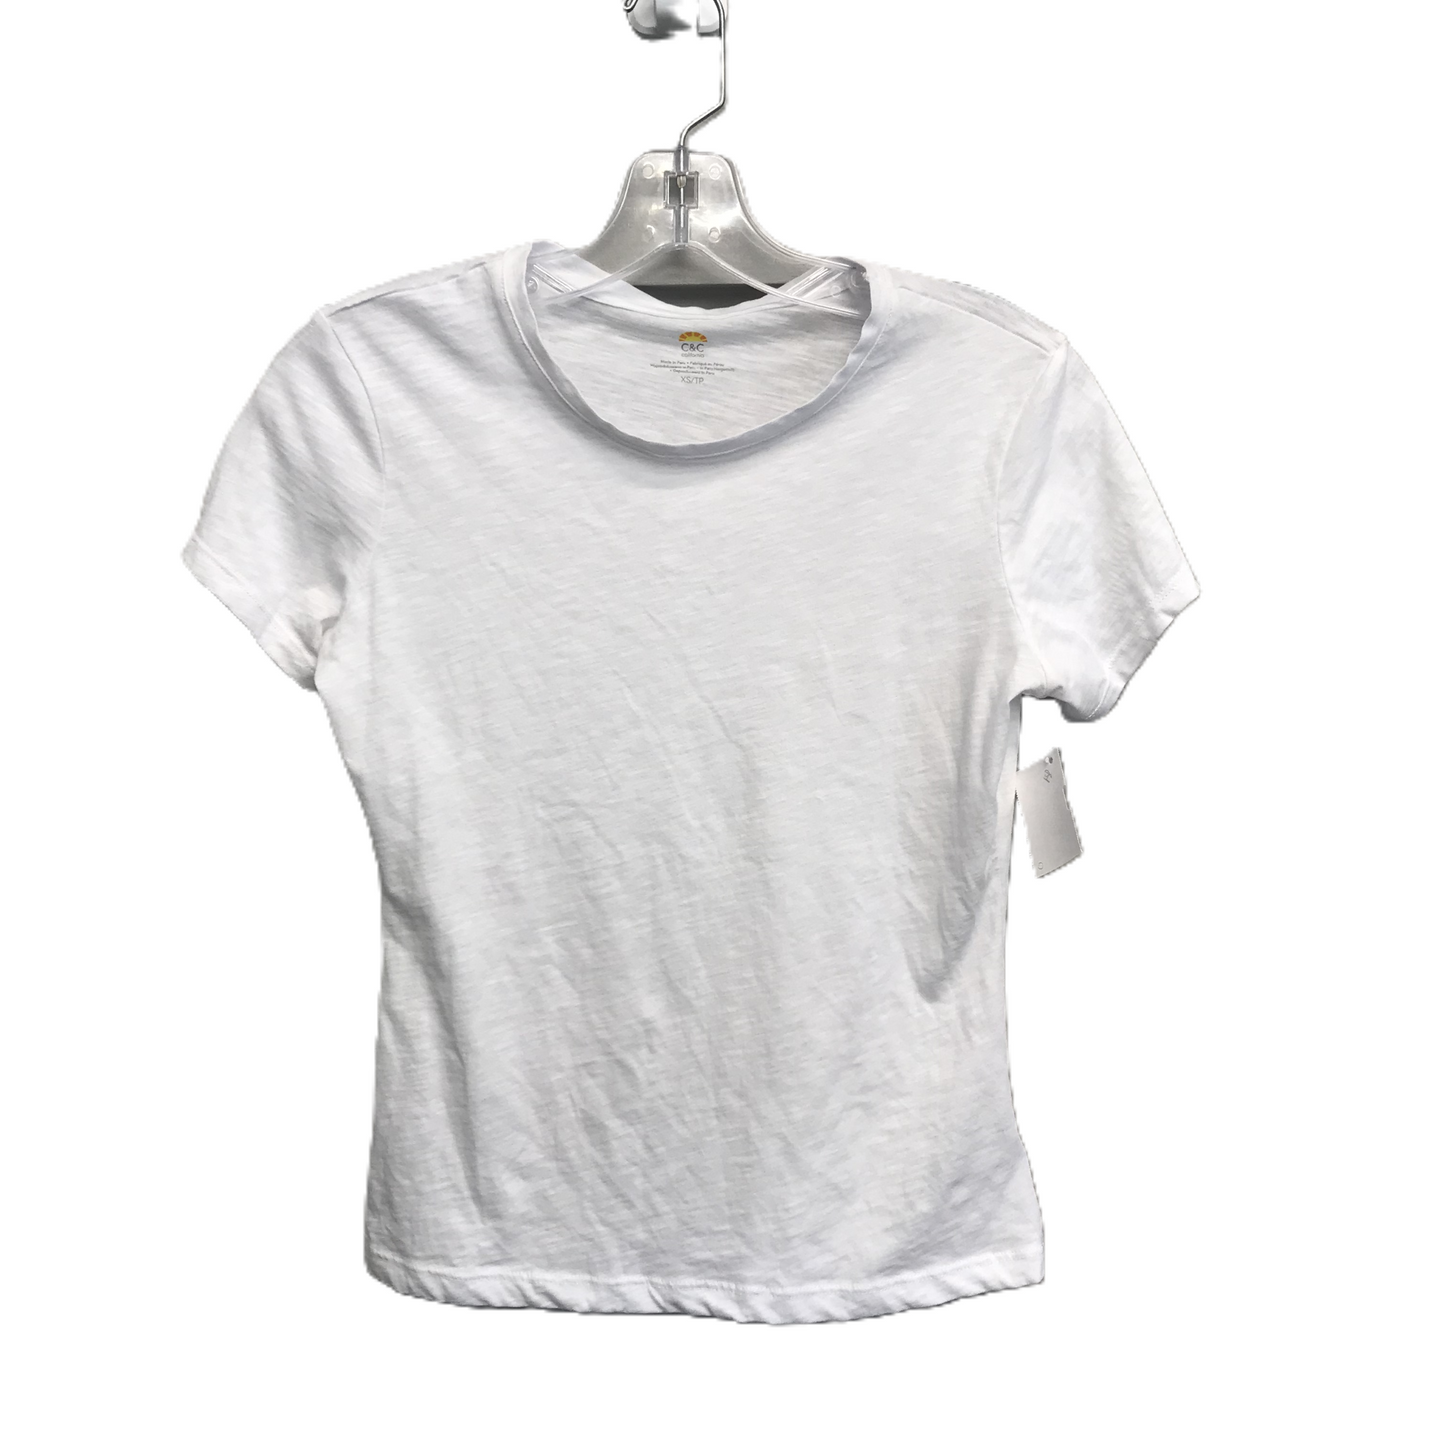 White Top Short Sleeve Basic By C And C, Size: S